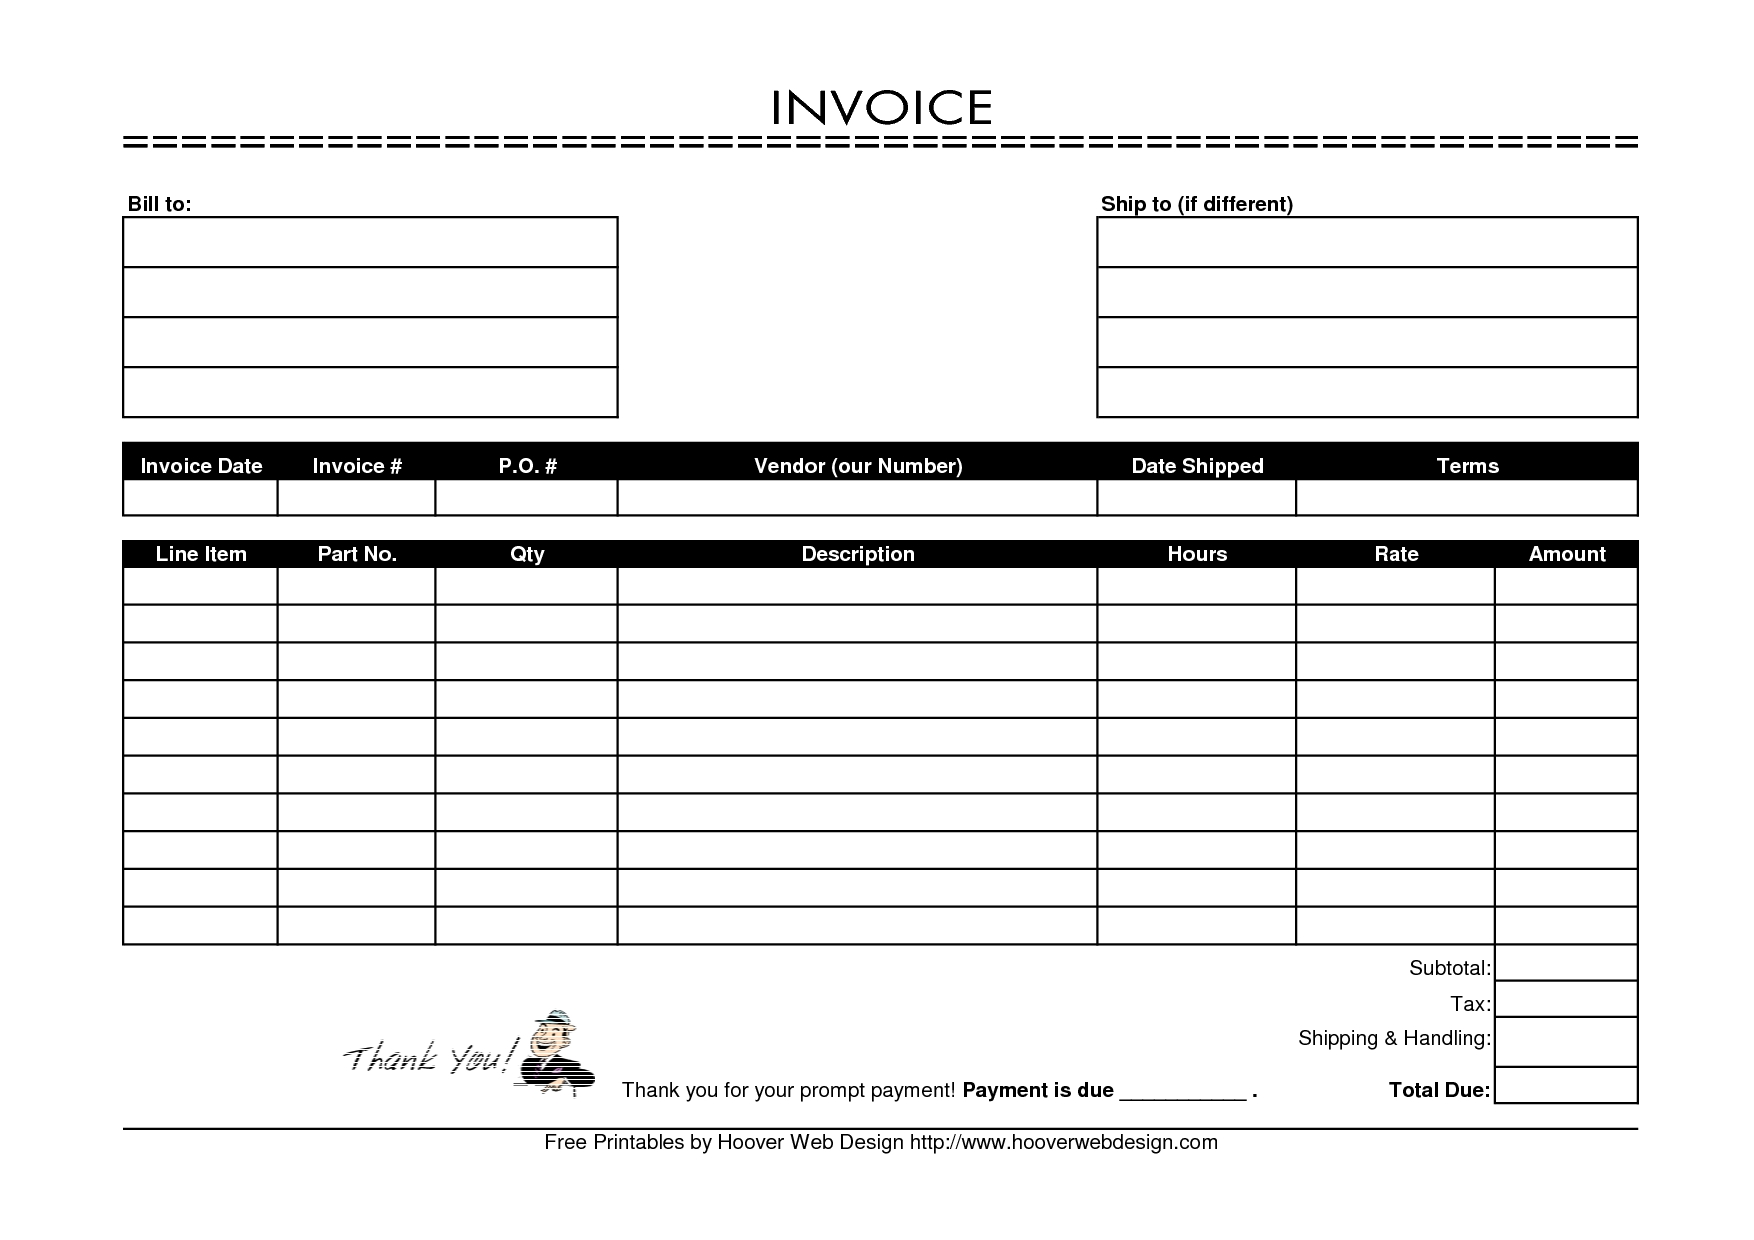 software free printable and invoice template on pinterest printable invoice free